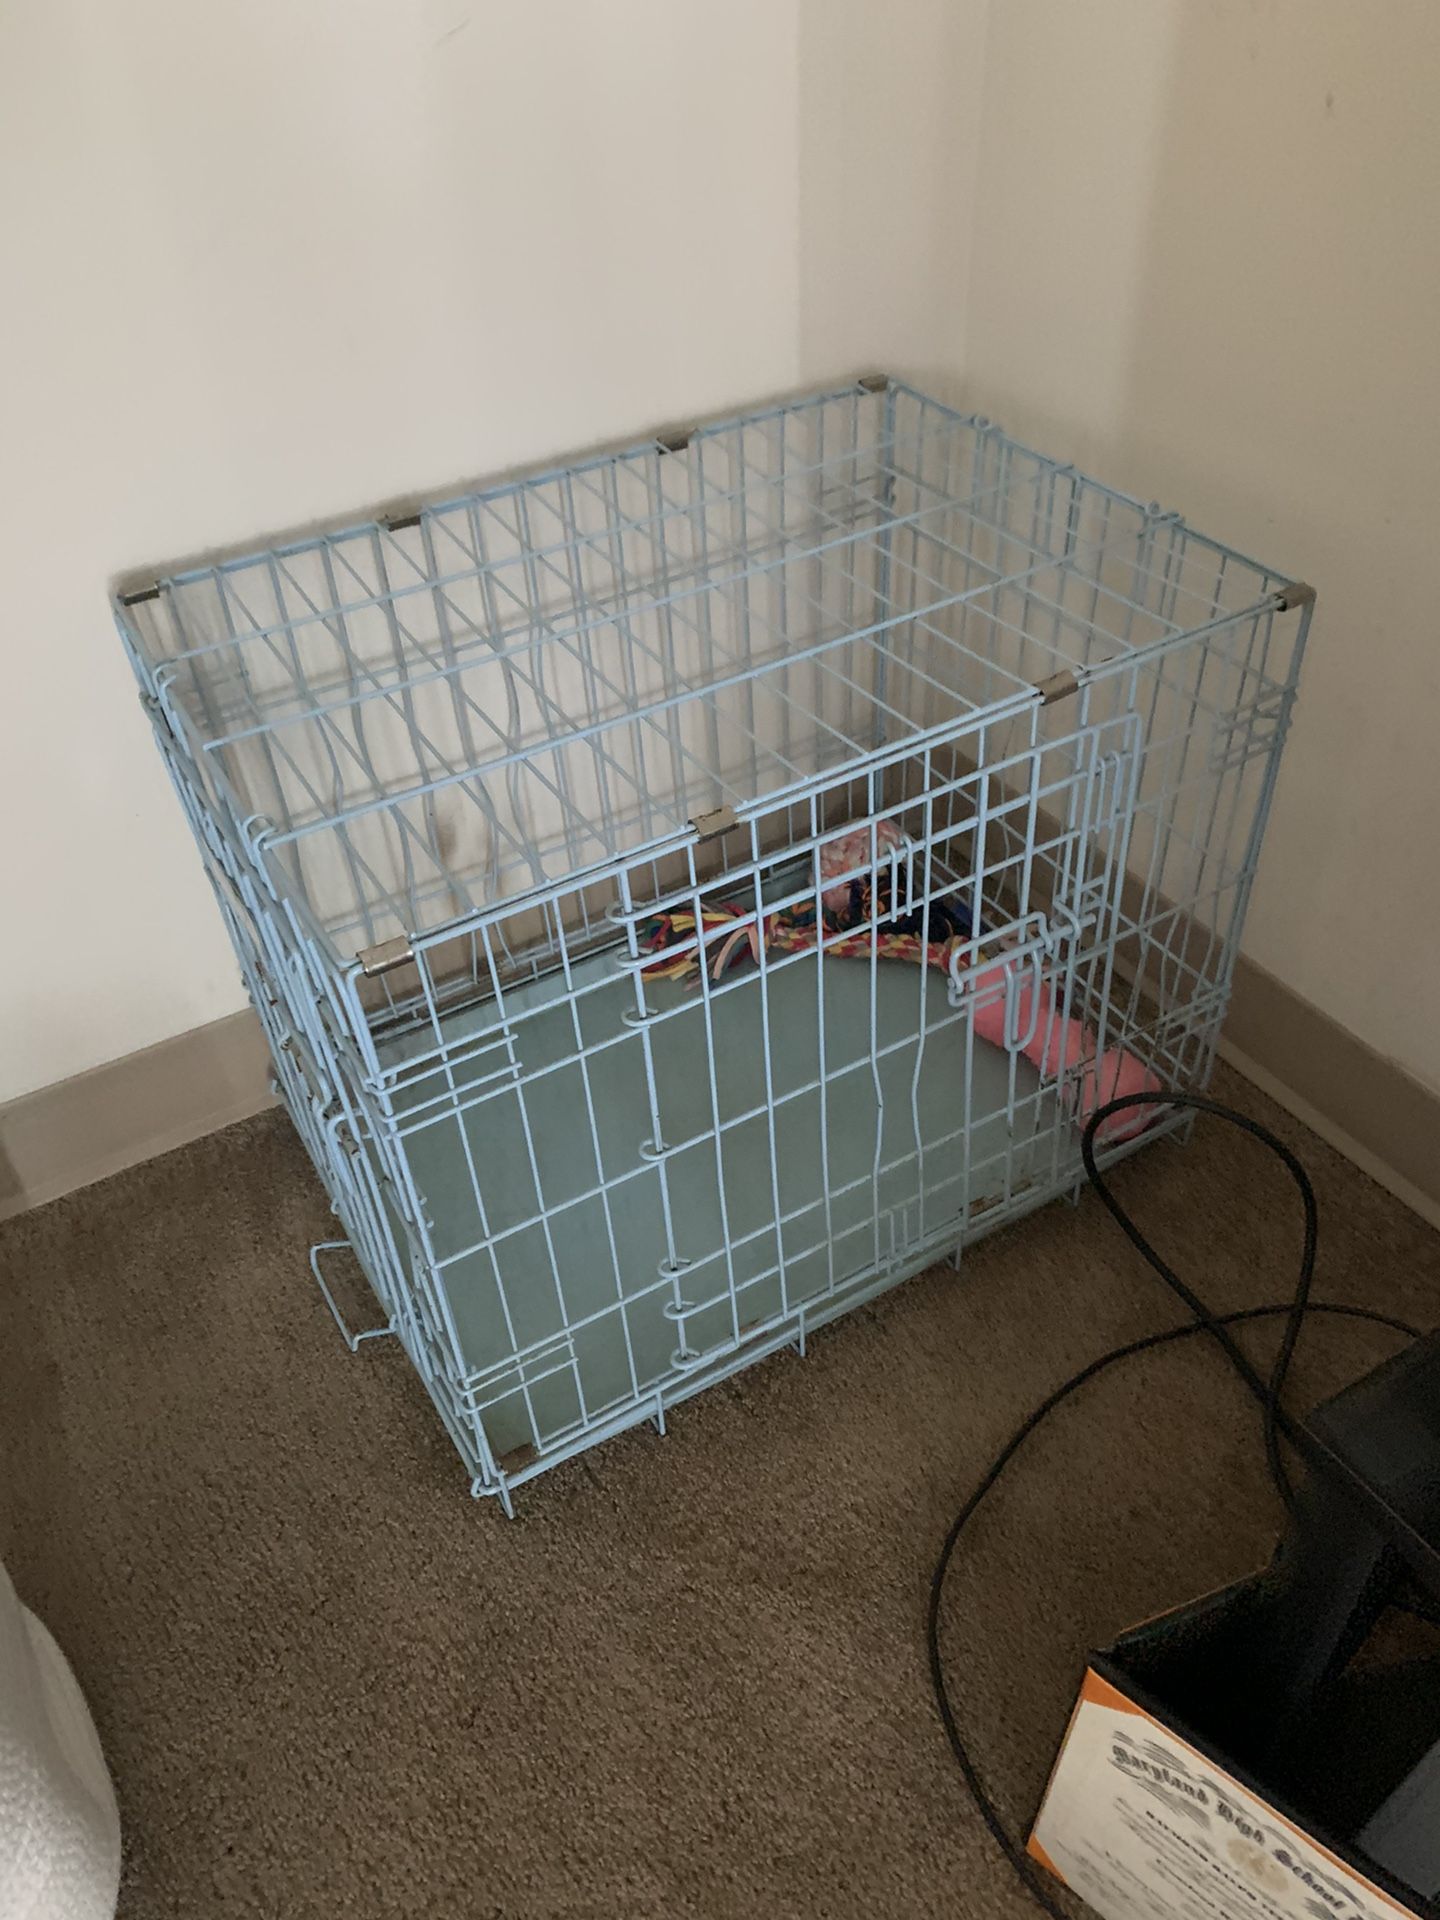 Dog cage for small breed dogs such as French bulldog, Yorkie etc